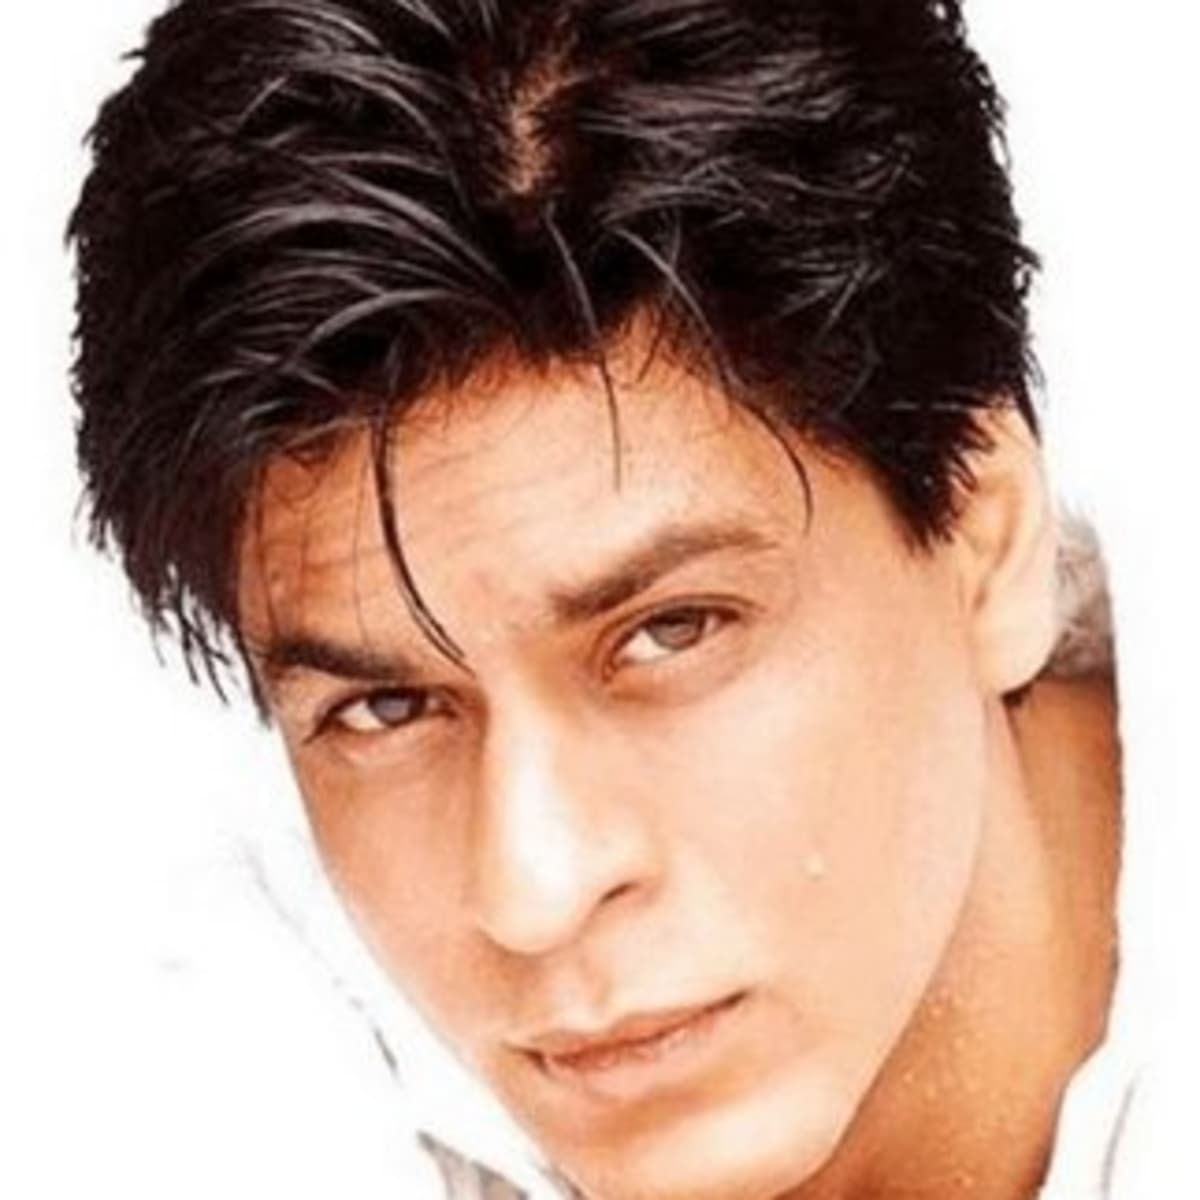 Why did Film Maker got emotional after seeing Shahrukh Khan's acting in  this Film . 